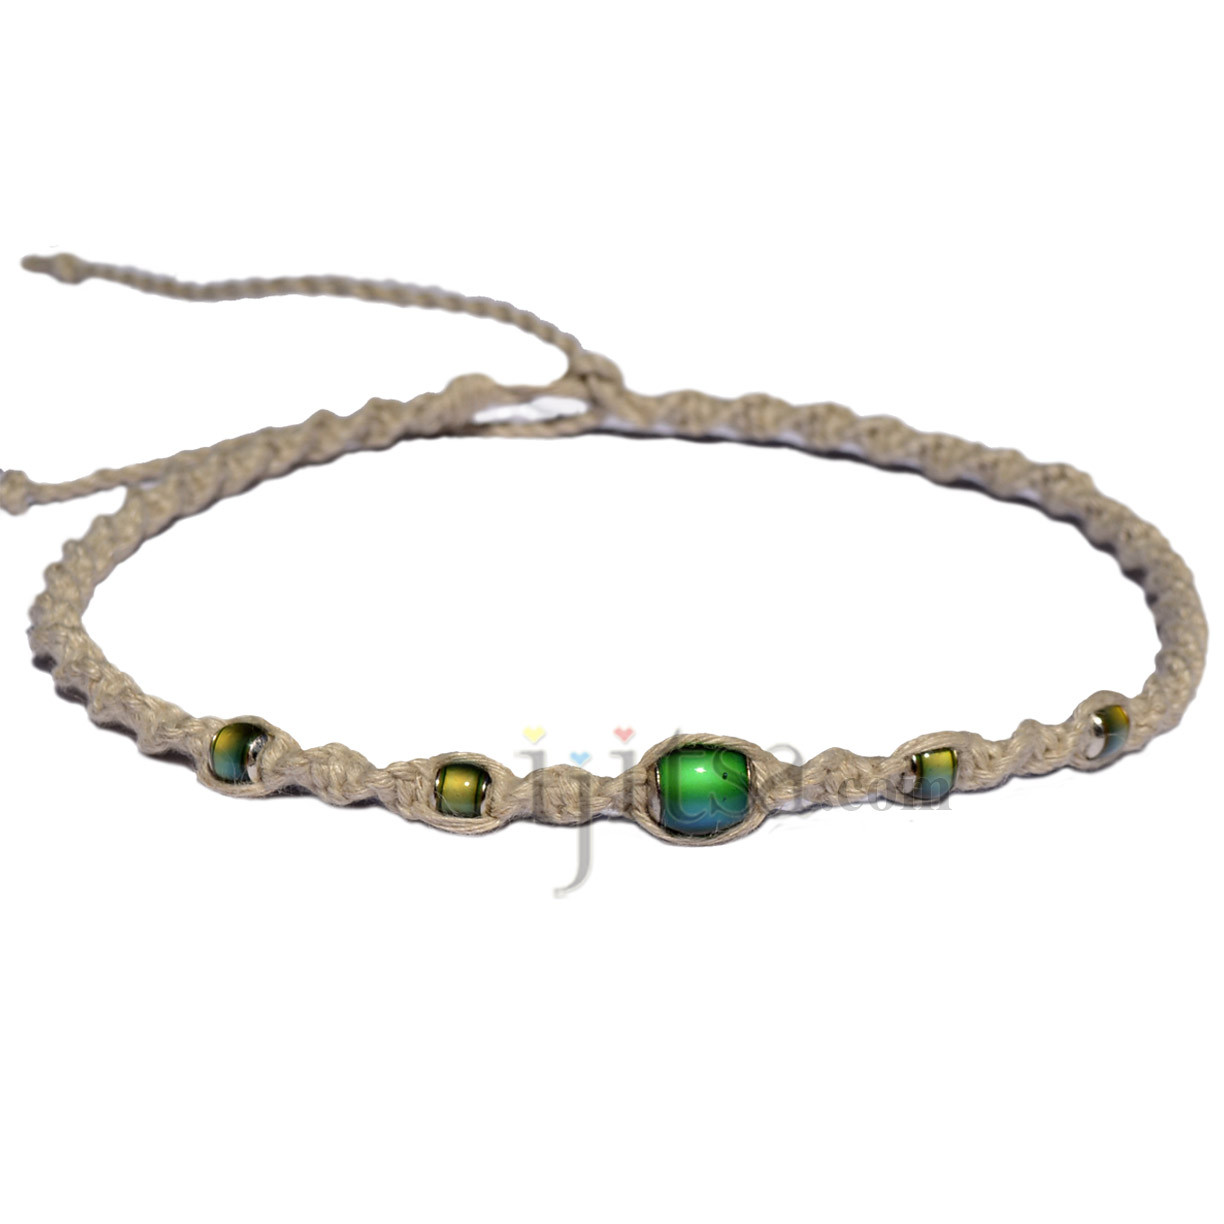 Buy Natural Hemp Twine Anklet With Cowry Shells and Wood Beads, Handmade  Beach Jewelry Made to Order Online in India - Etsy